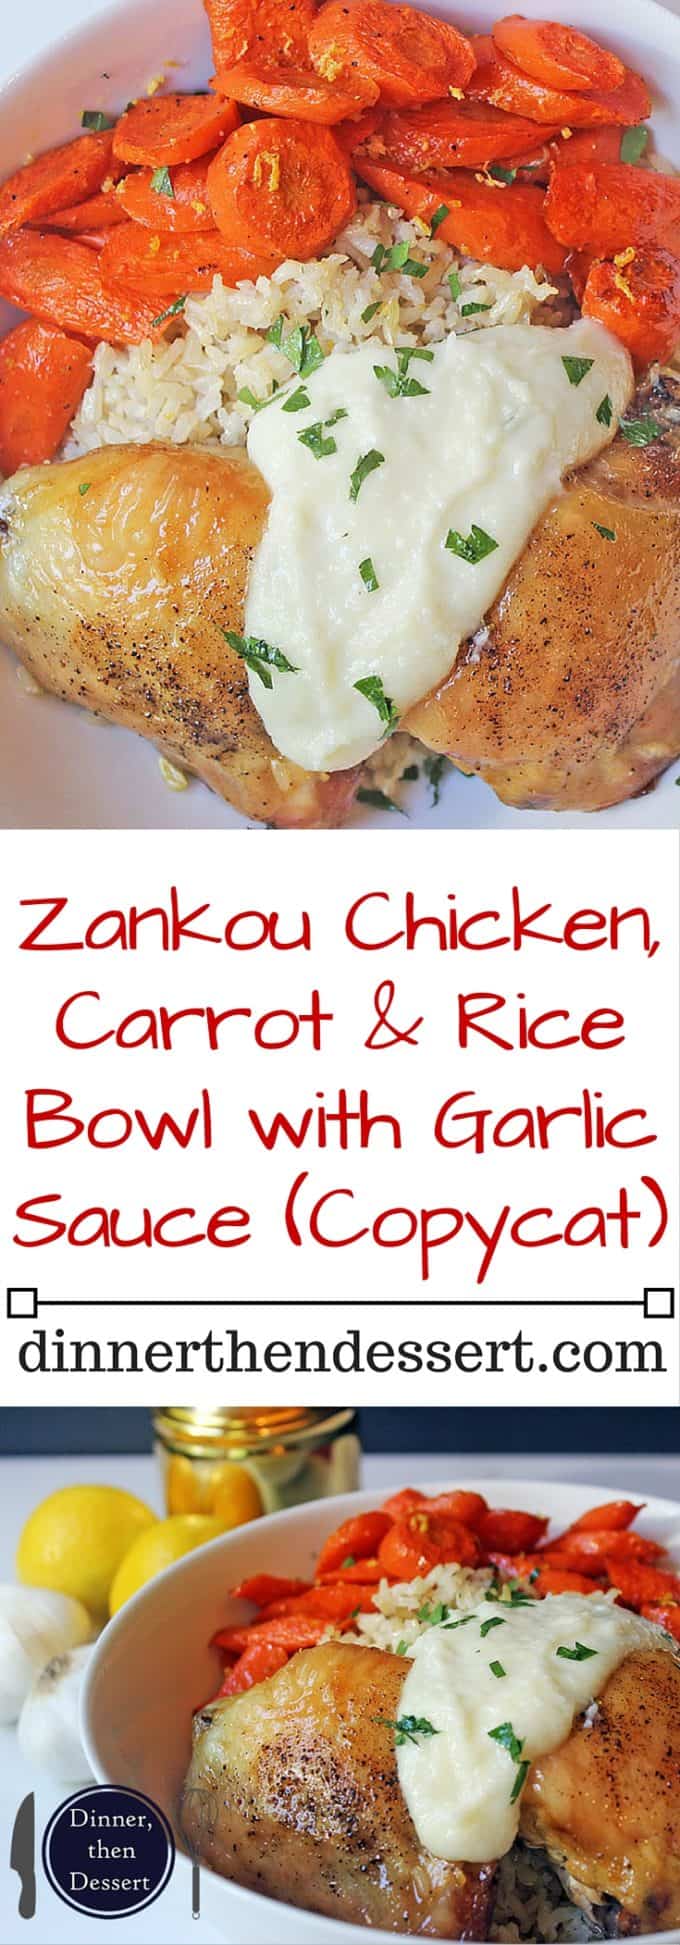 Zankou Chicken Copycat Bowl with their Chicken with Brown Rice Pilaf, Armenian Garlic Sauce & Lemon Scented Carrots. 